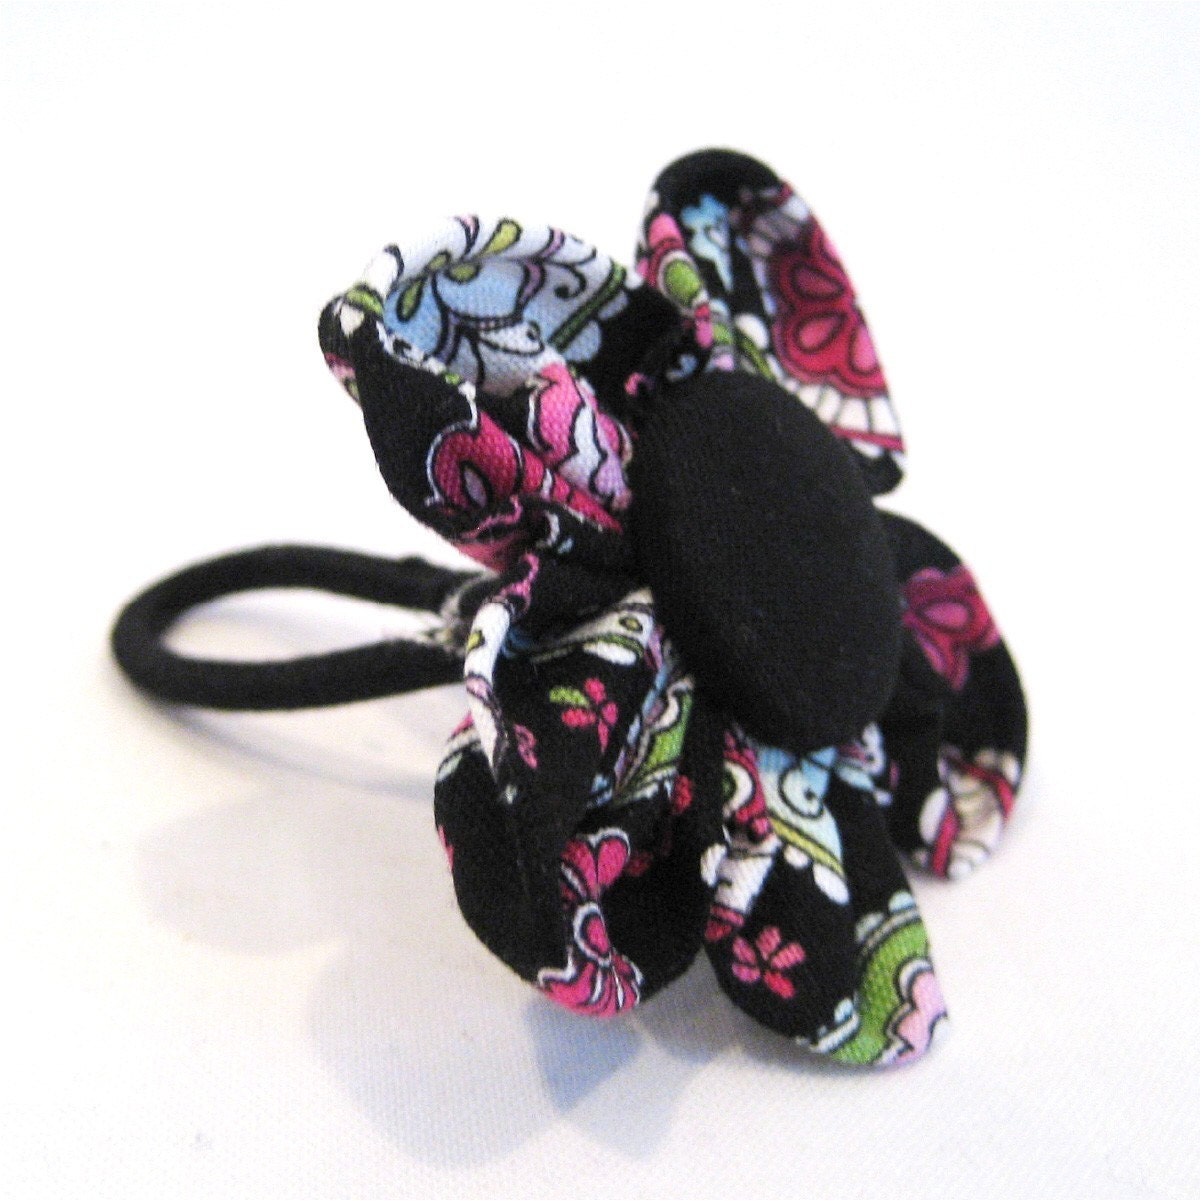 Fabric Flower Ponytail or Hair Clip - Tossed Candy Fabric